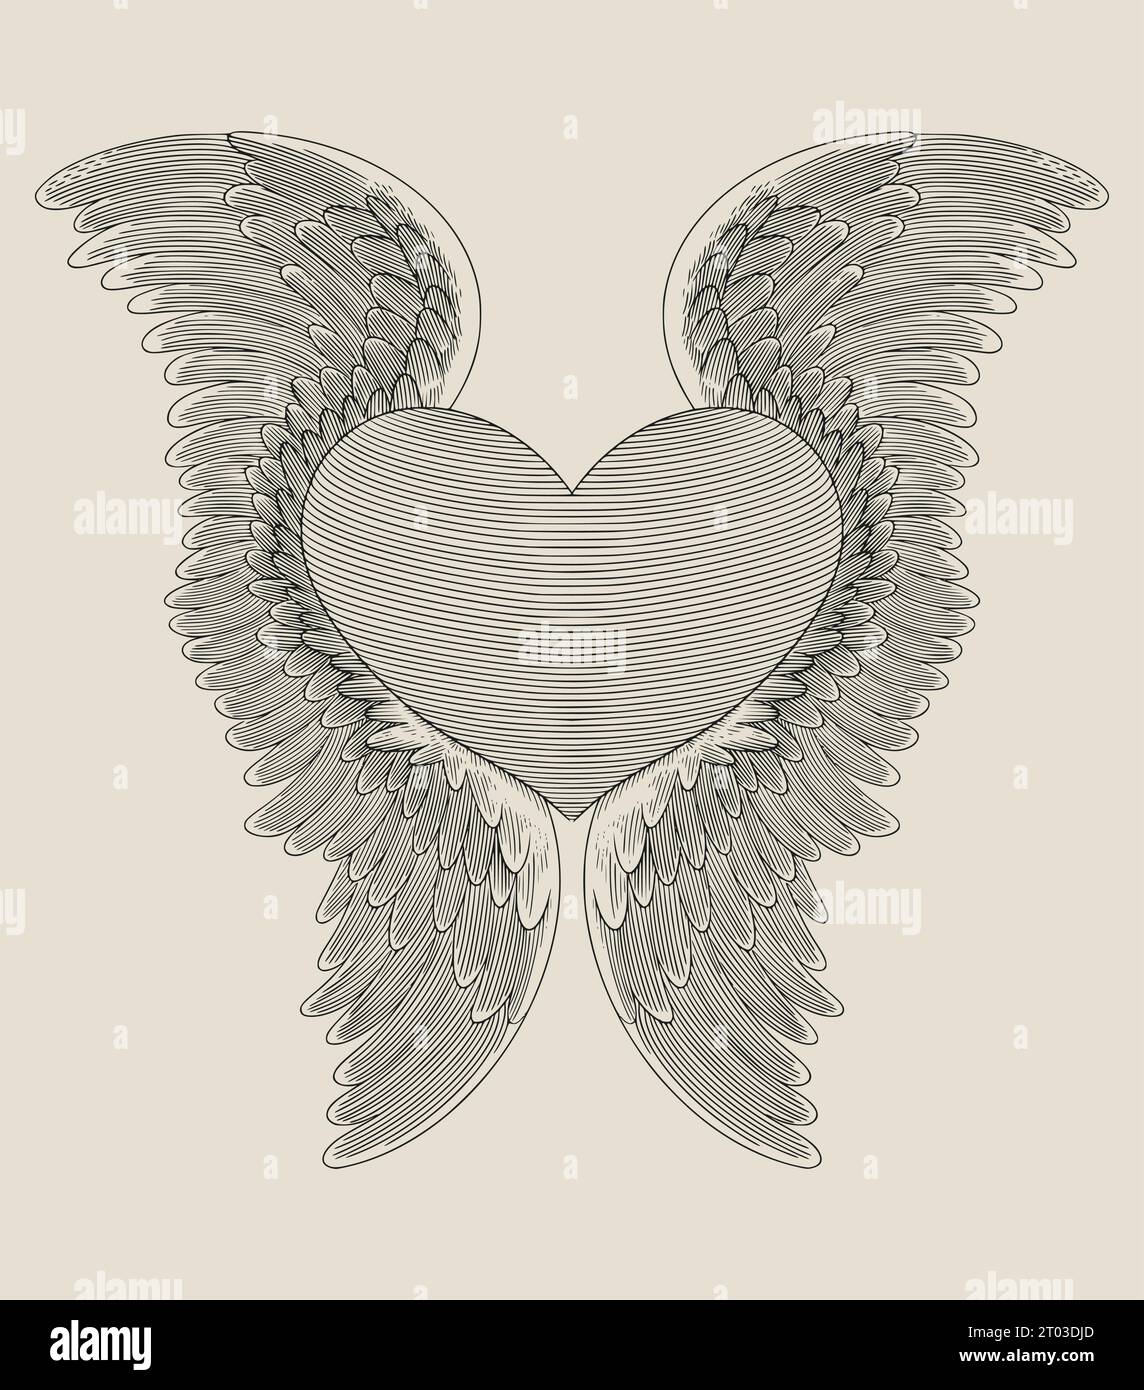 heart with angel wings. vintage engraving drawing vector illustration Stock Vector